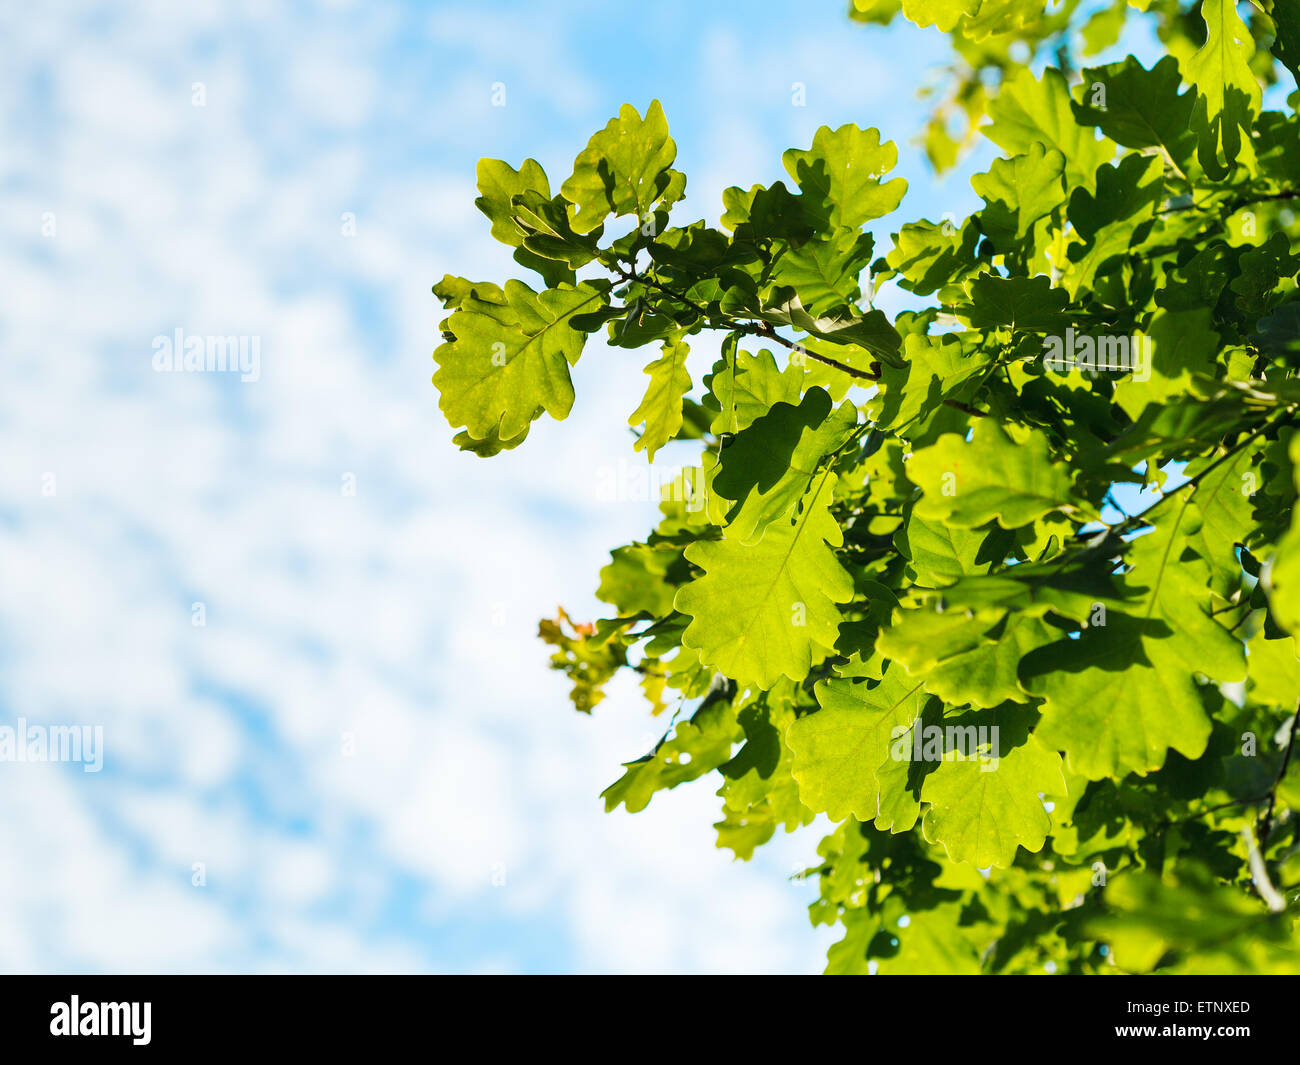 natural summer background with sunlit oak foliage and blue sky with white clouds Stock Photo